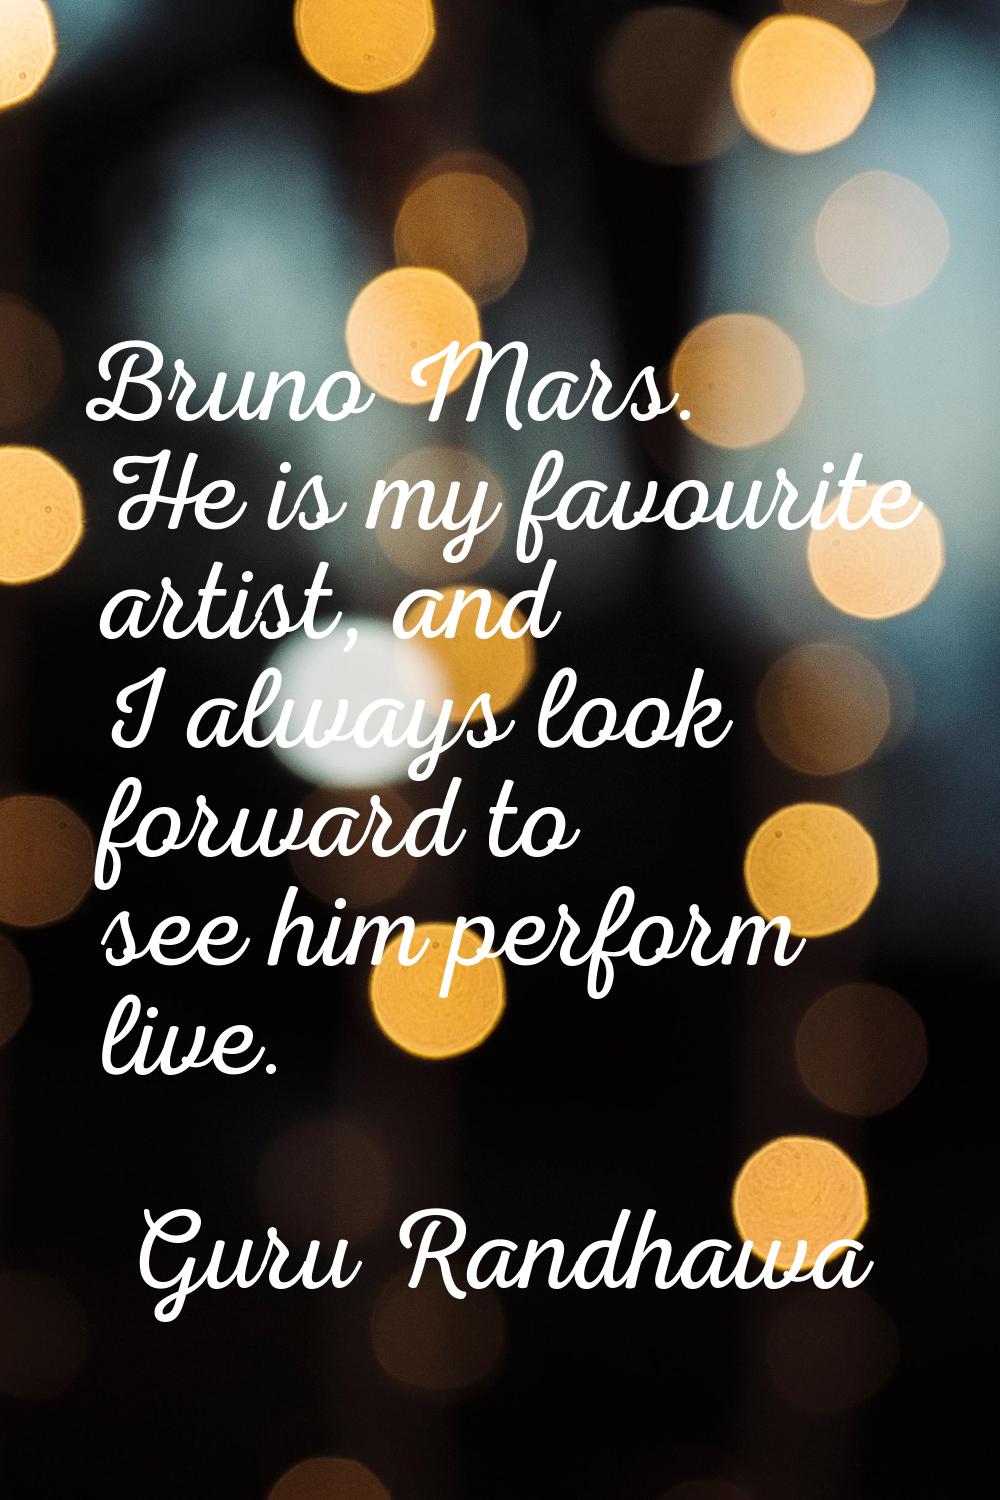 Bruno Mars. He is my favourite artist, and I always look forward to see him perform live.